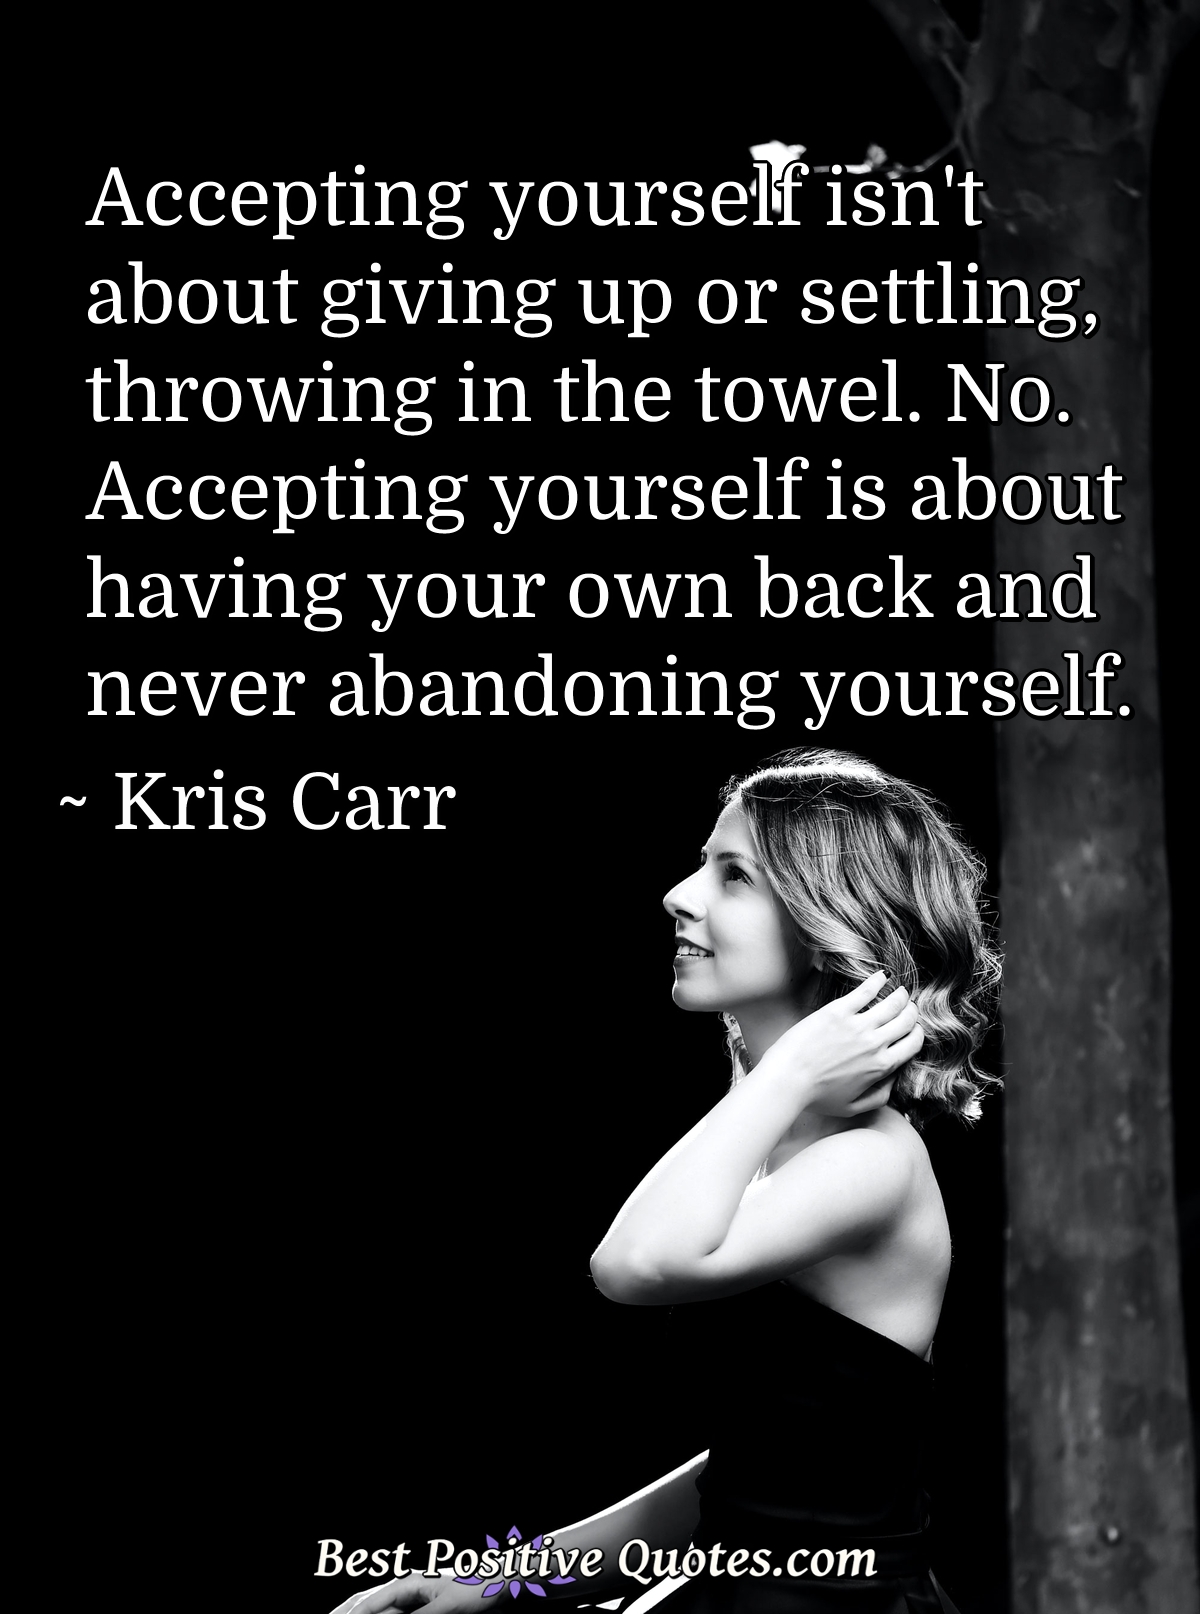 Accepting yourself isn't about giving up or settling, throwing in the towel. No. Accepting yourself is about having your own back and never abandoning yourself. - Kris Carr